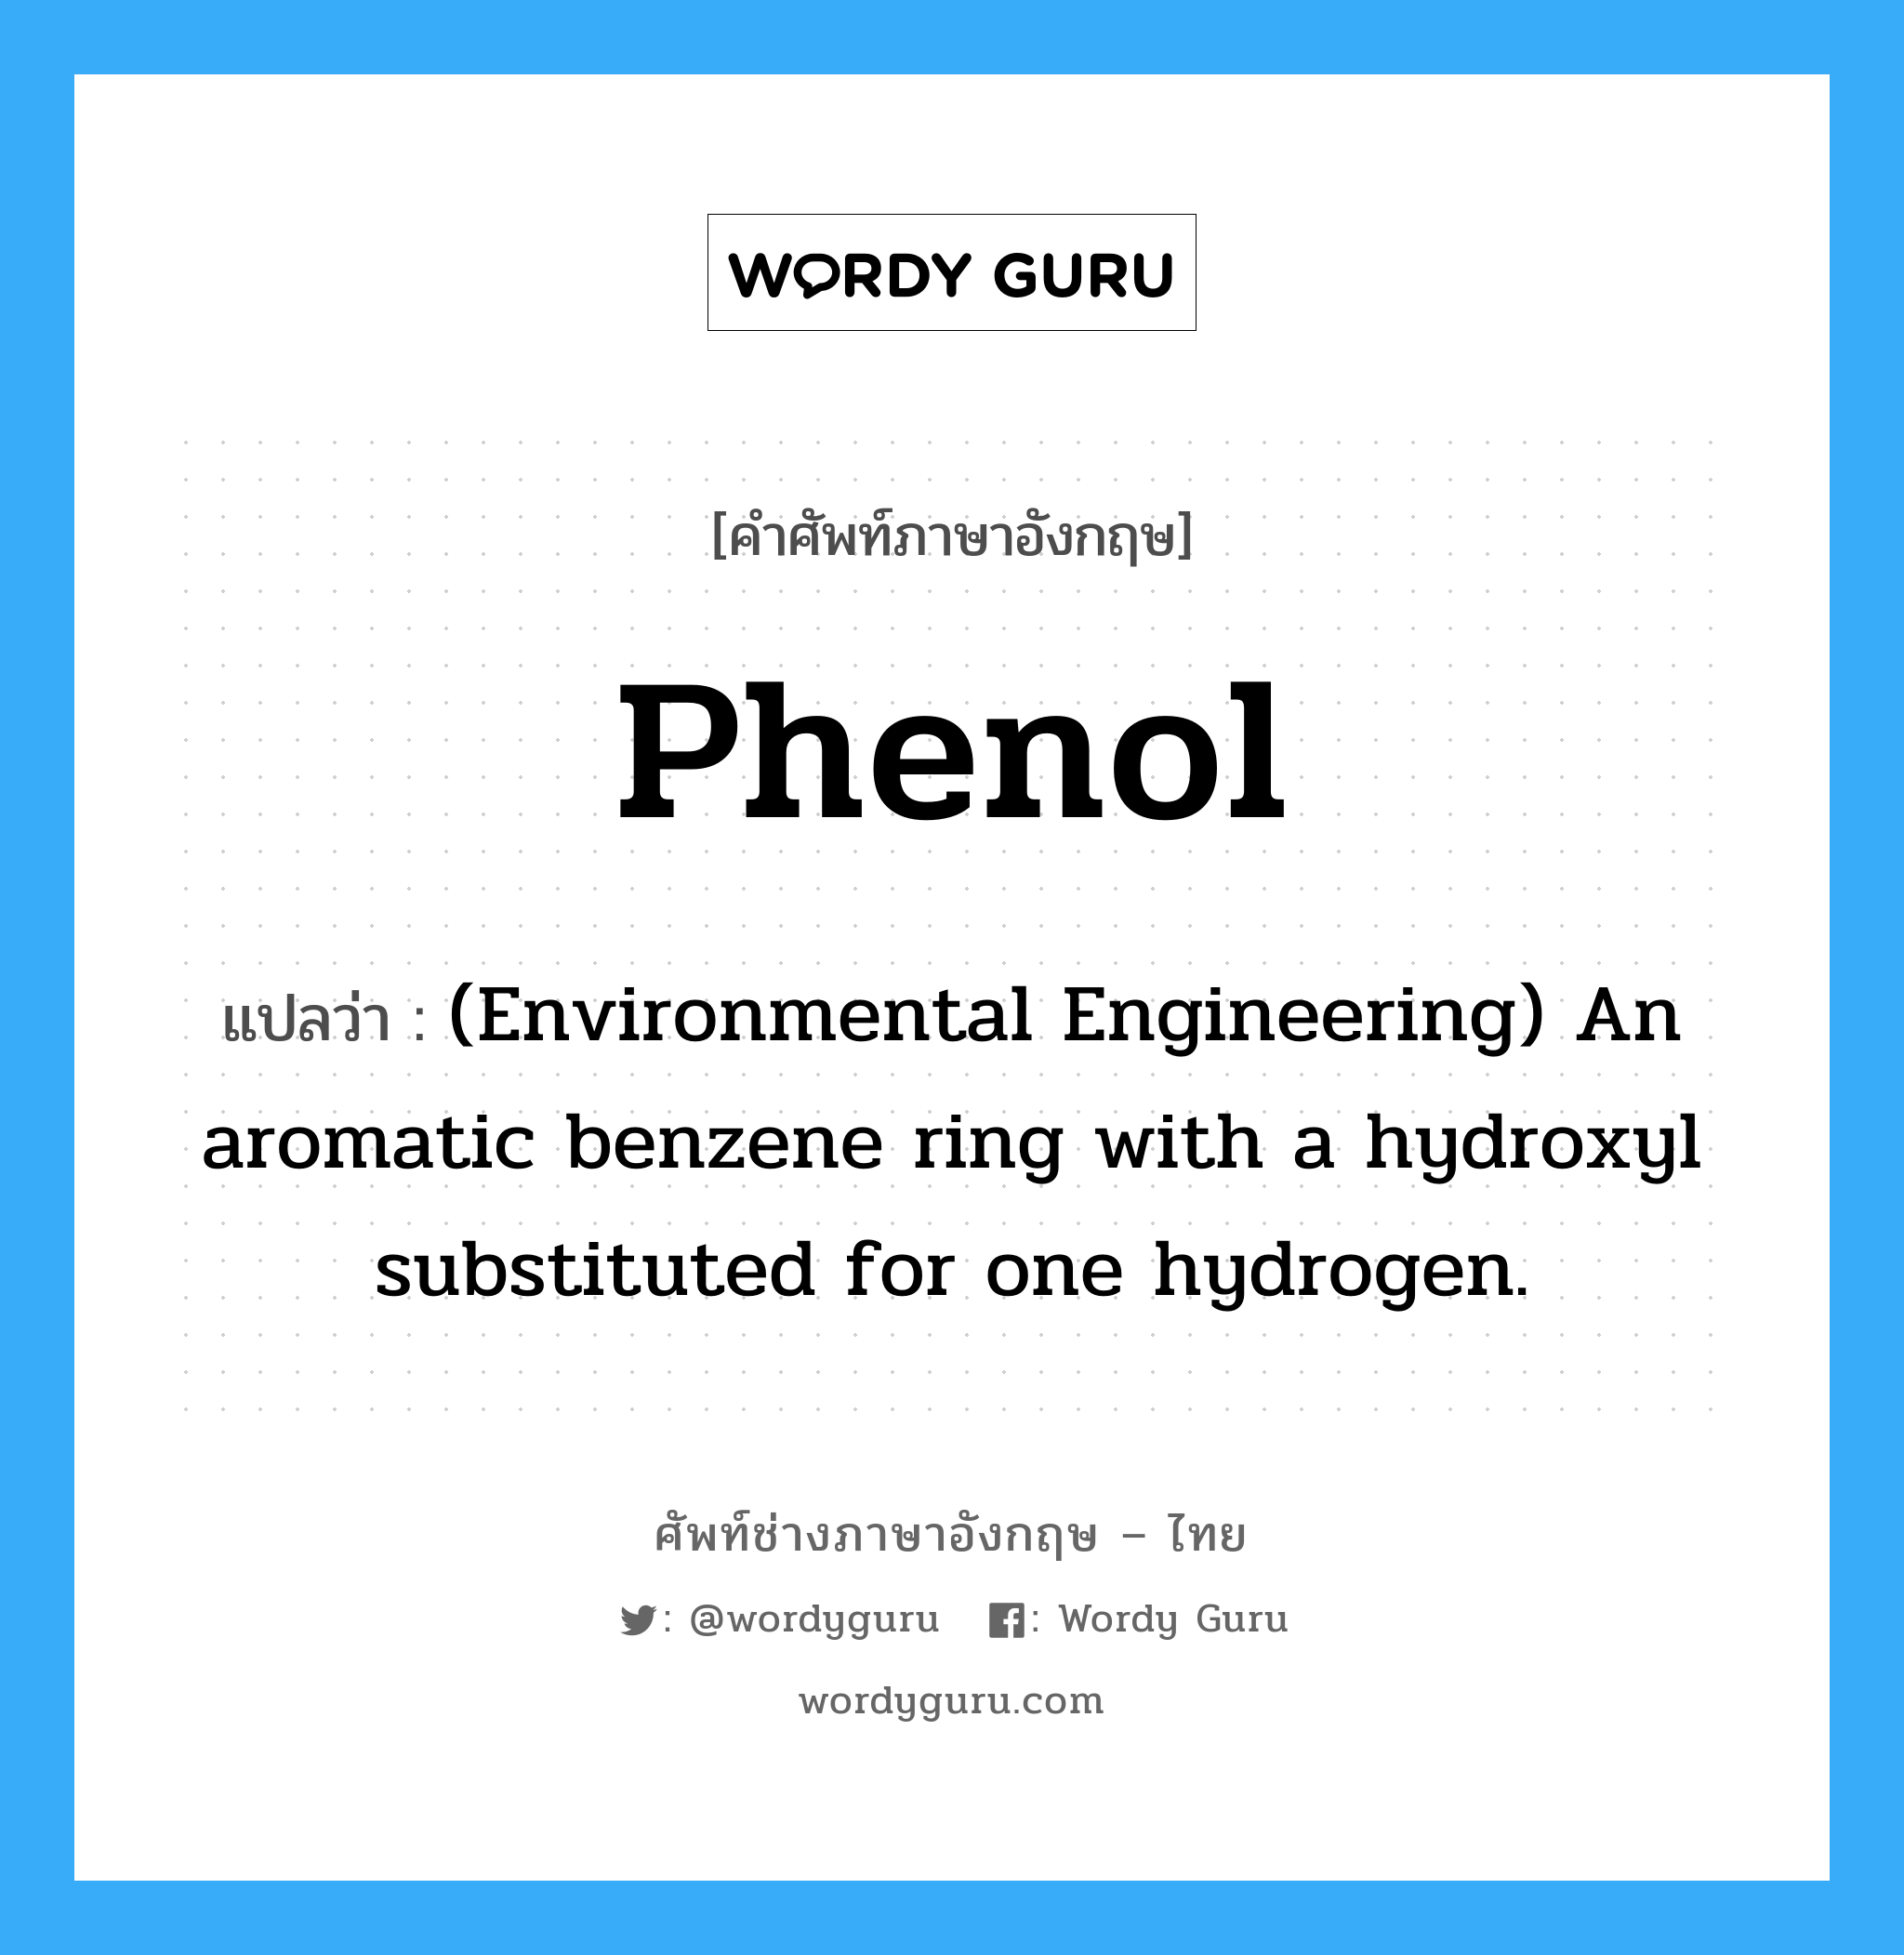 Phenol แปลว่า?, คำศัพท์ช่างภาษาอังกฤษ - ไทย Phenol คำศัพท์ภาษาอังกฤษ Phenol แปลว่า (Environmental Engineering) An aromatic benzene ring with a hydroxyl substituted for one hydrogen.